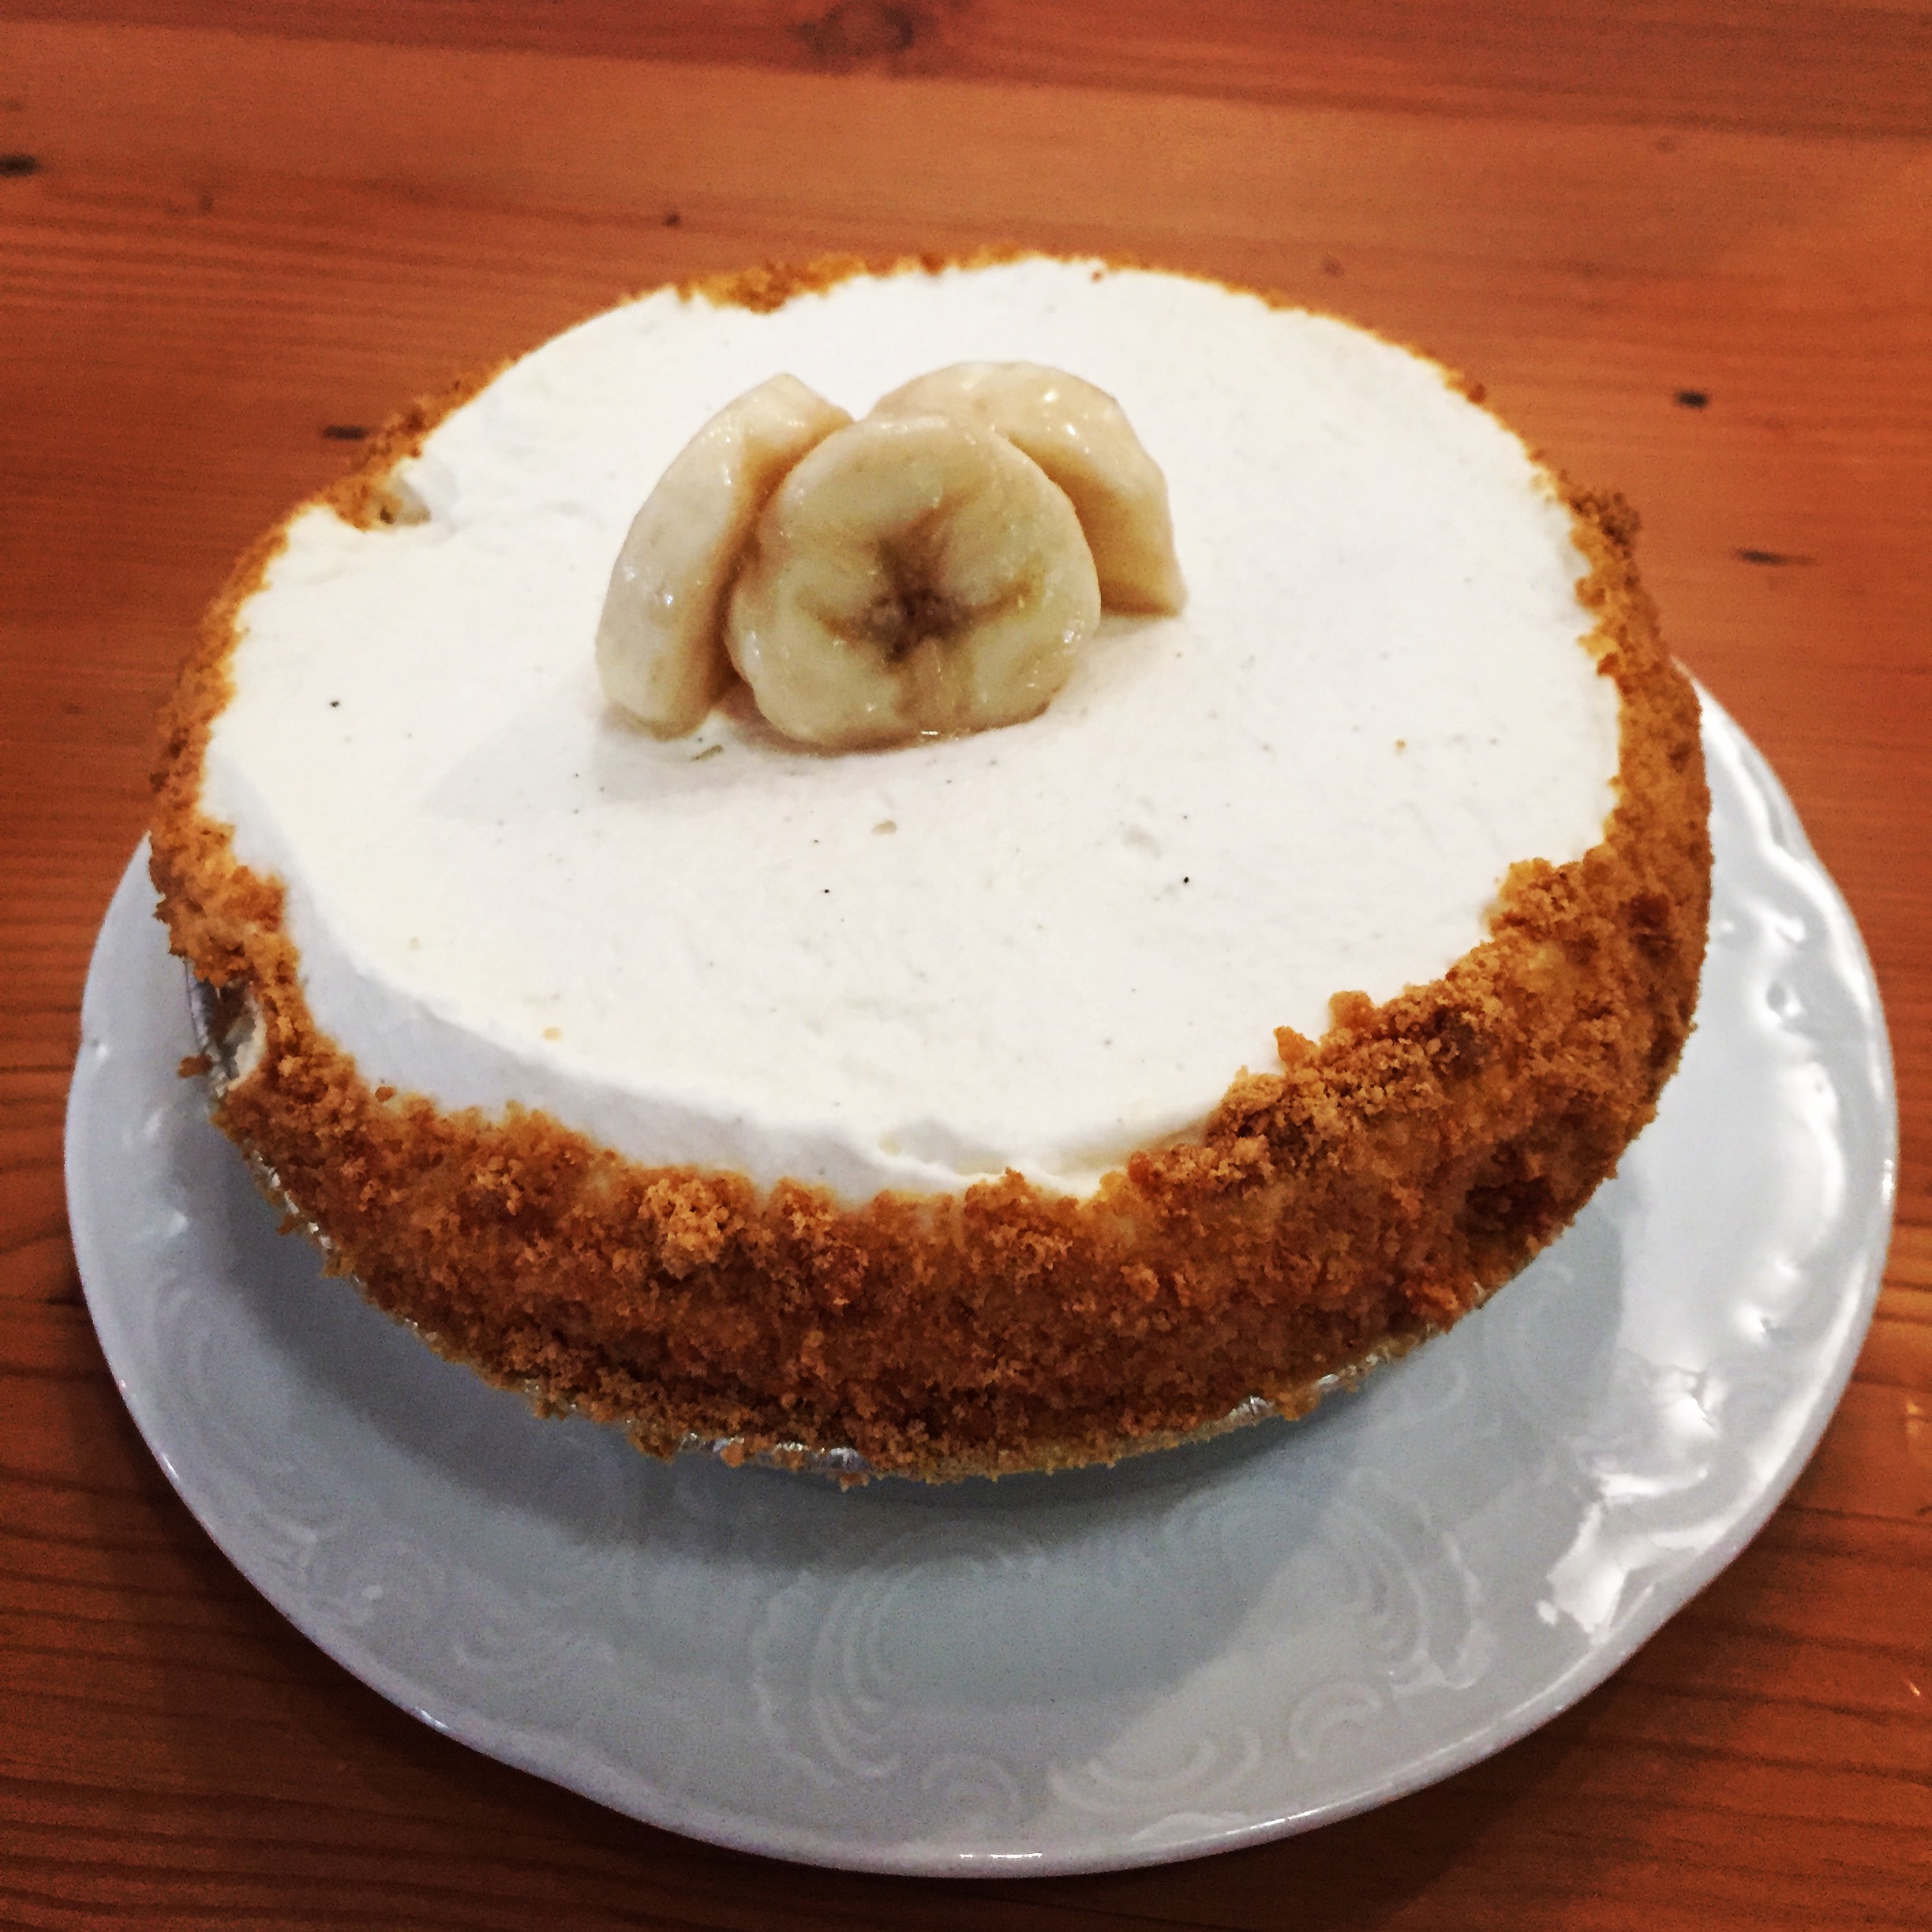 a cake with bananas on top